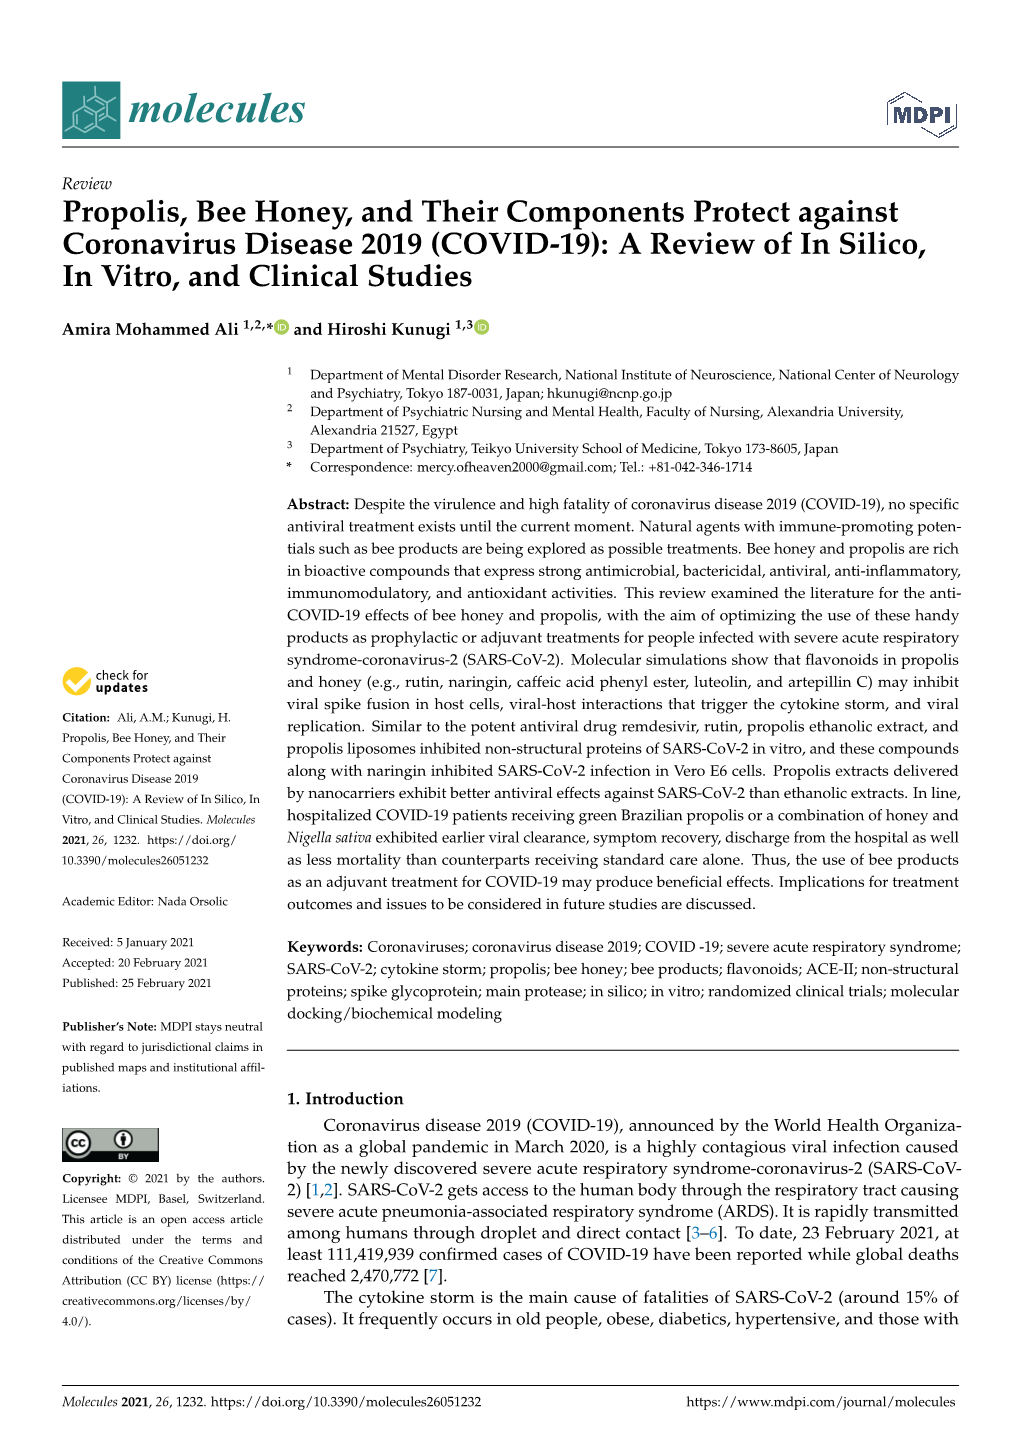 Propolis, Bee Honey, and Their Components Protect Against Coronavirus Disease 2019 (COVID-19): a Review of in Silico, in Vitro, and Clinical Studies